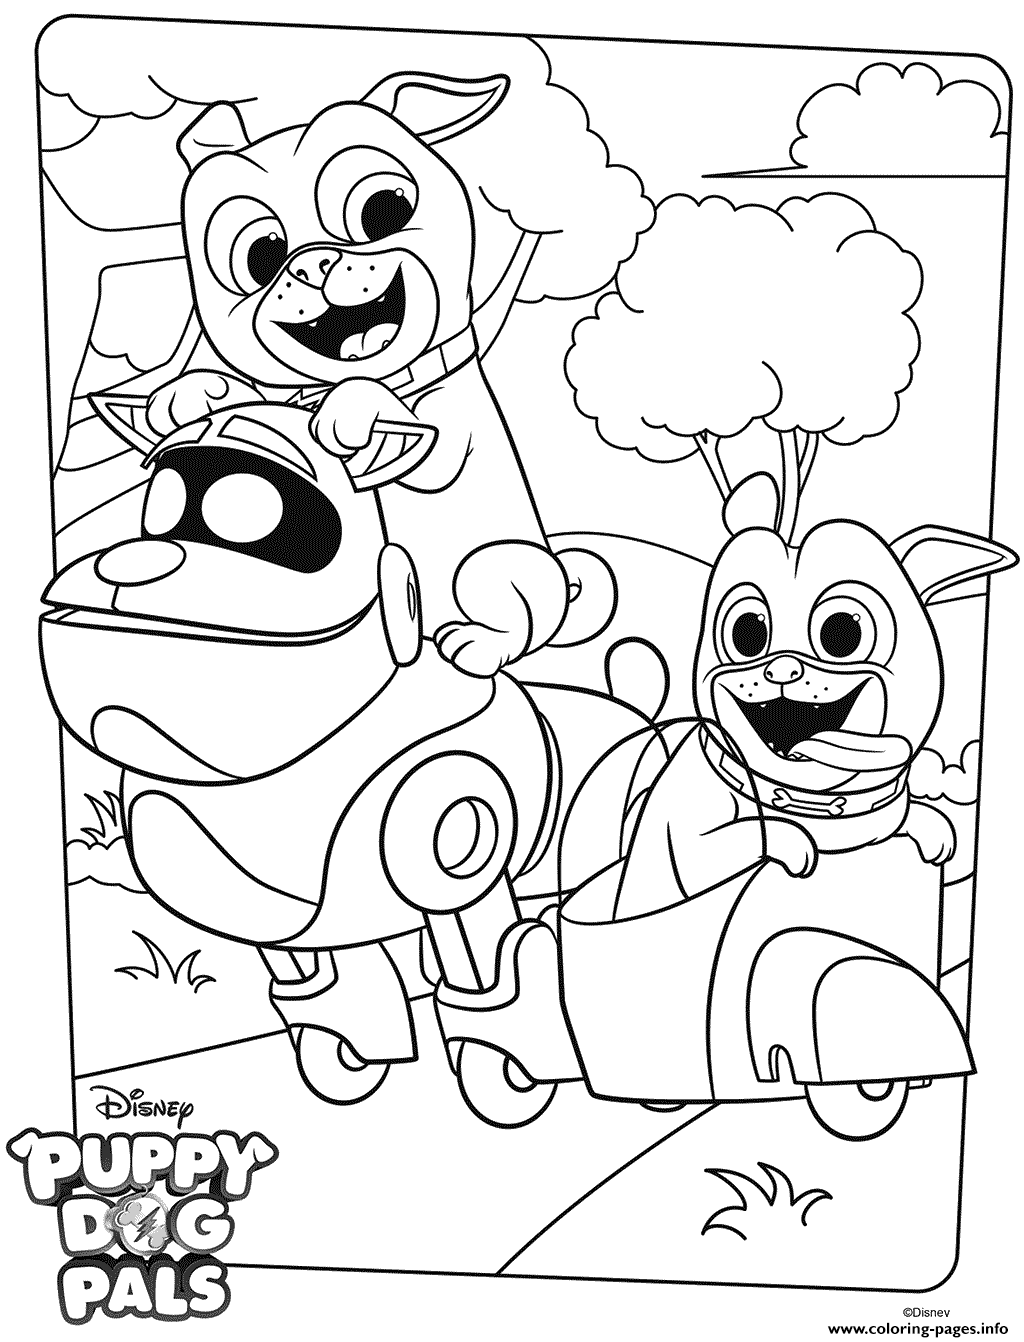 bingo-rolly-and-arf-coloring-page-printable